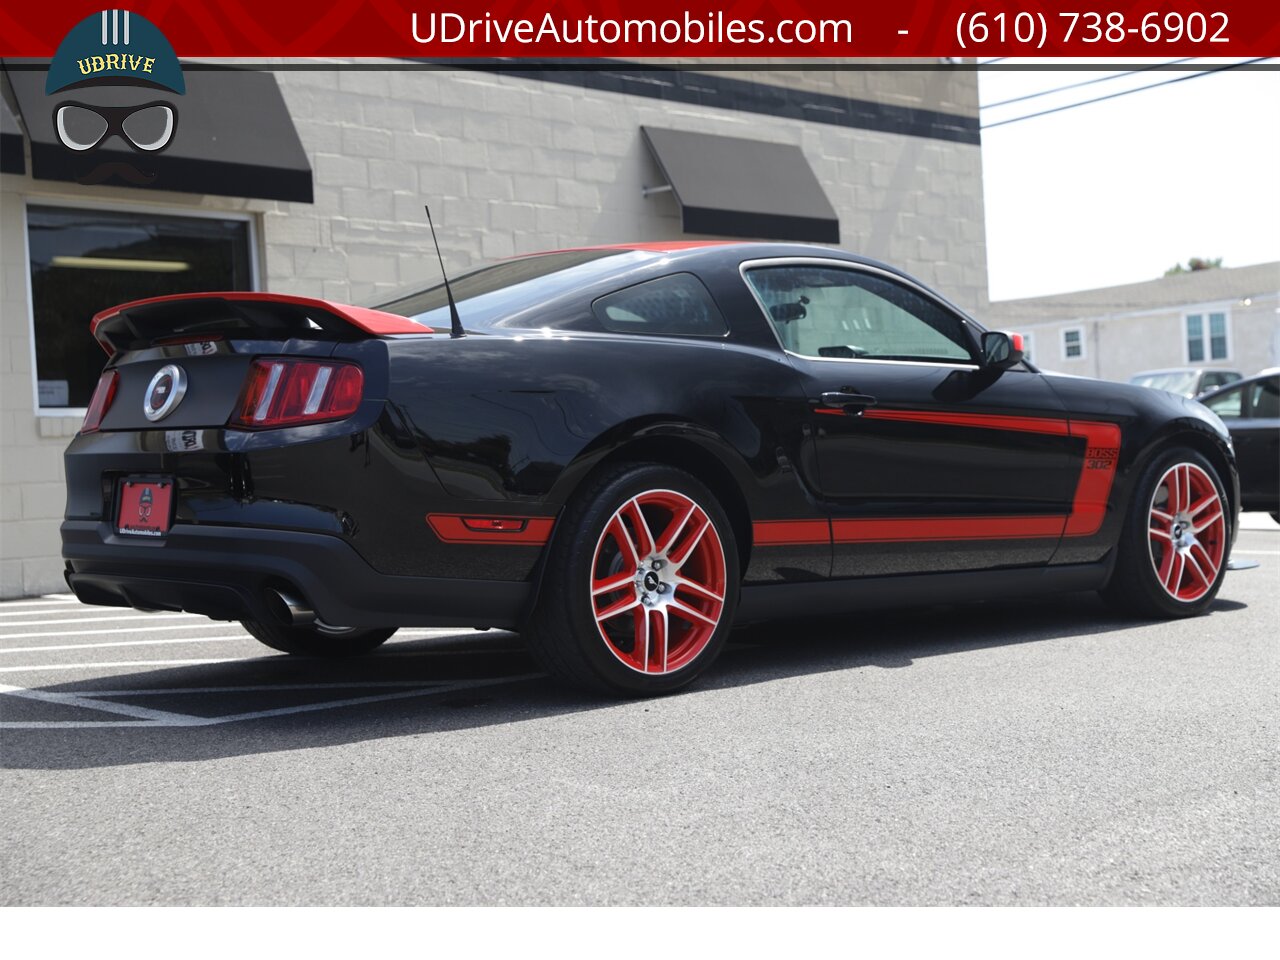 2012 Ford Mustang 866 Miles Boss 302 Laguna Seca #338 of 750  Red TracKey Activated - Photo 18 - West Chester, PA 19382